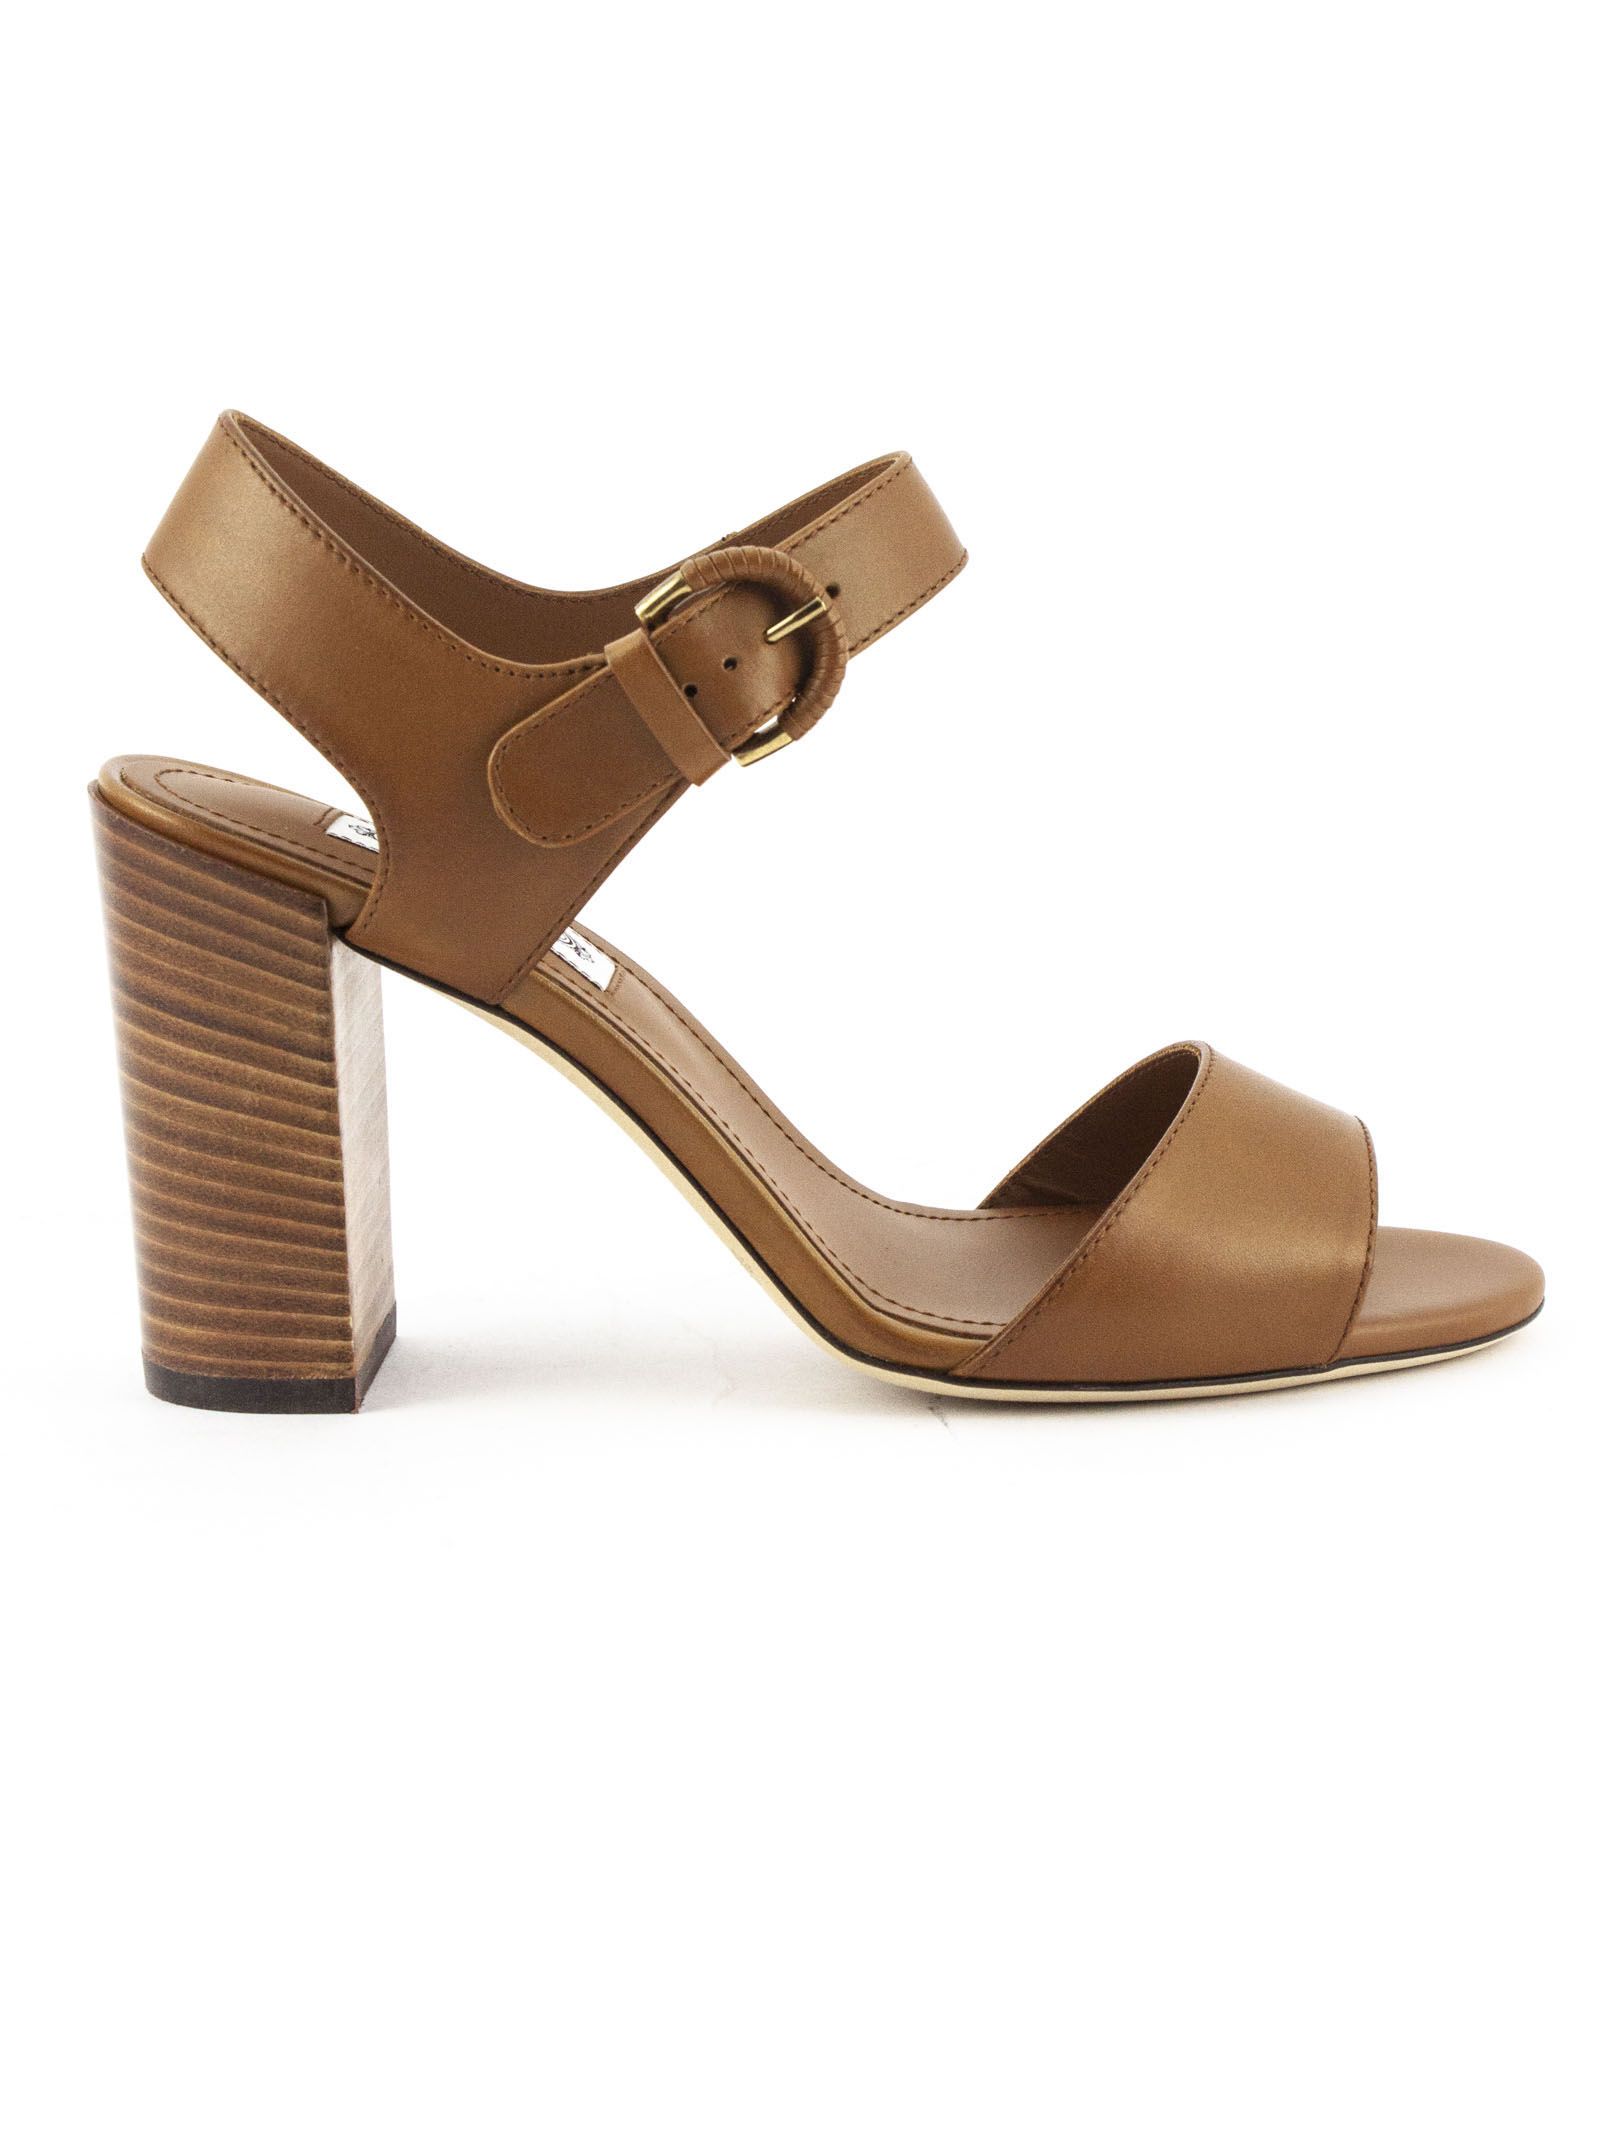 TOD'S SANDALS IN BROWN SMOOTH LEATHER,10876605